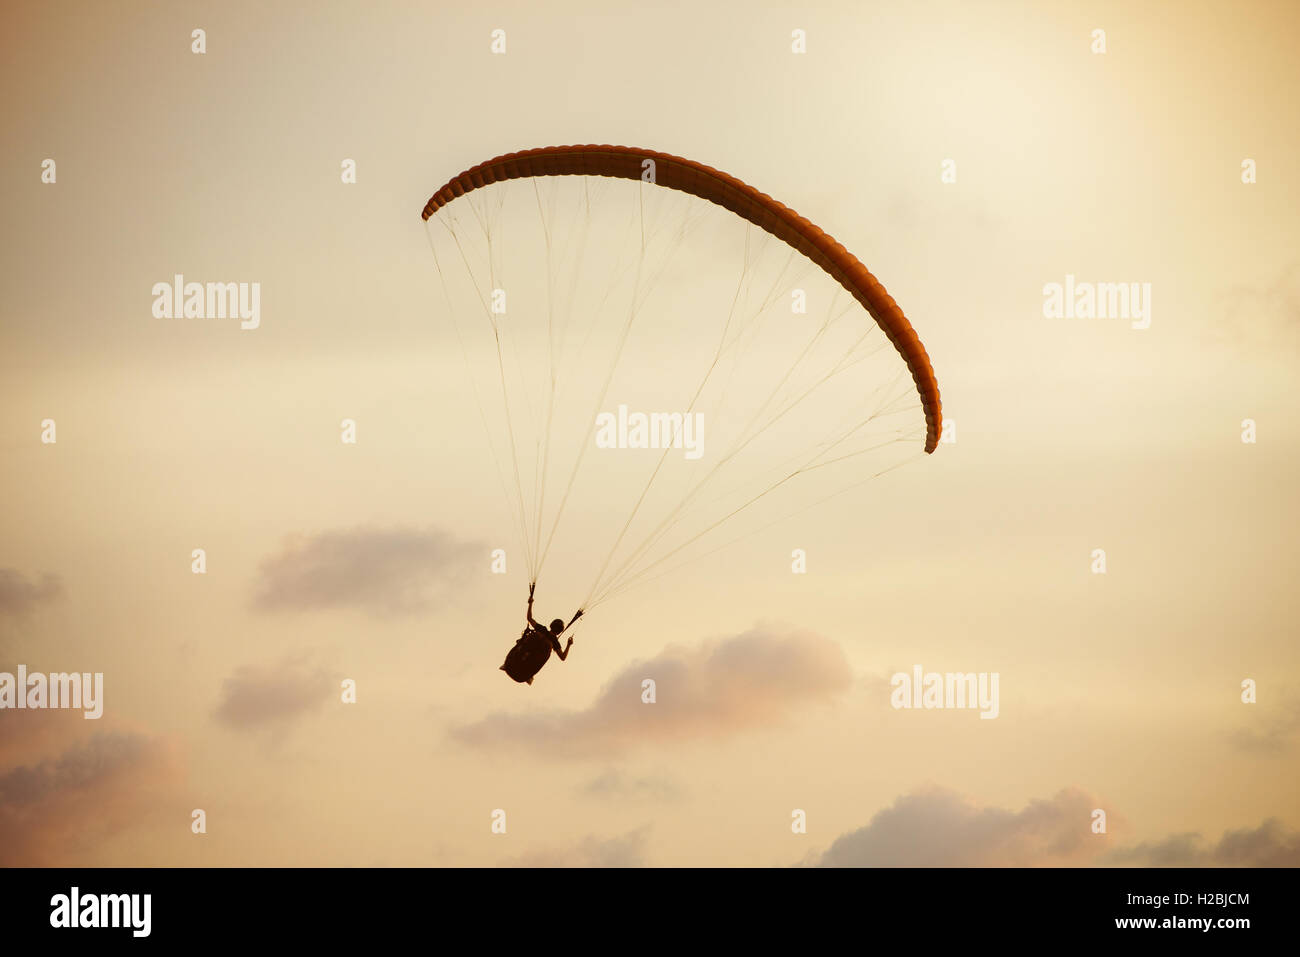 Paraglider flies on background of the sea Stock Photo